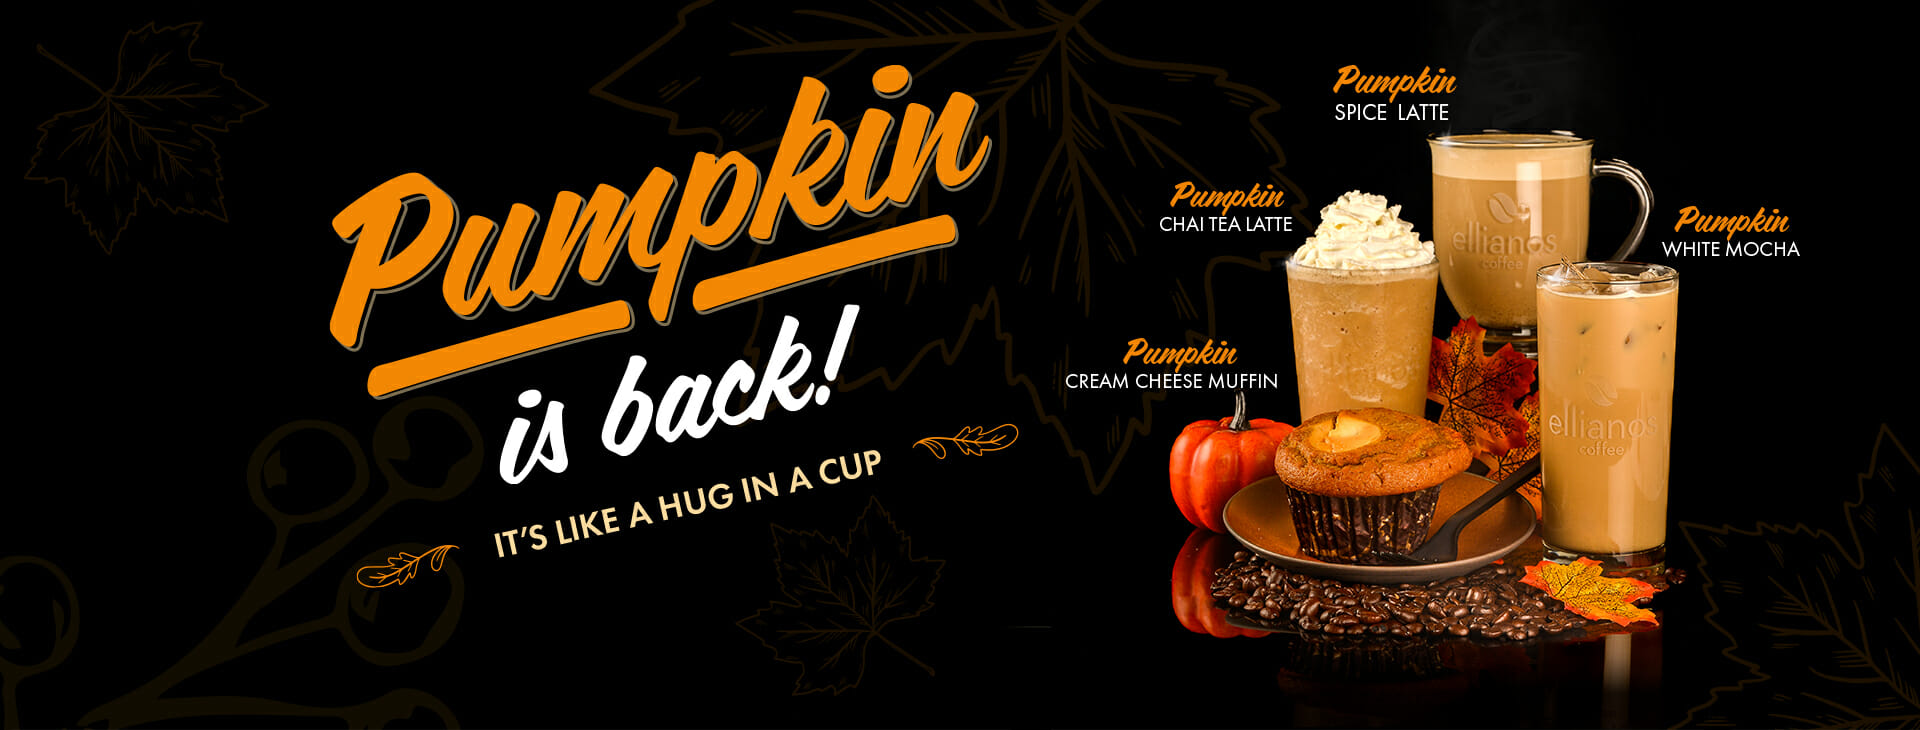 Fall Arrives Early: Ellianos Coffee To Unveil Three New Pumpkin Drinks on August 14